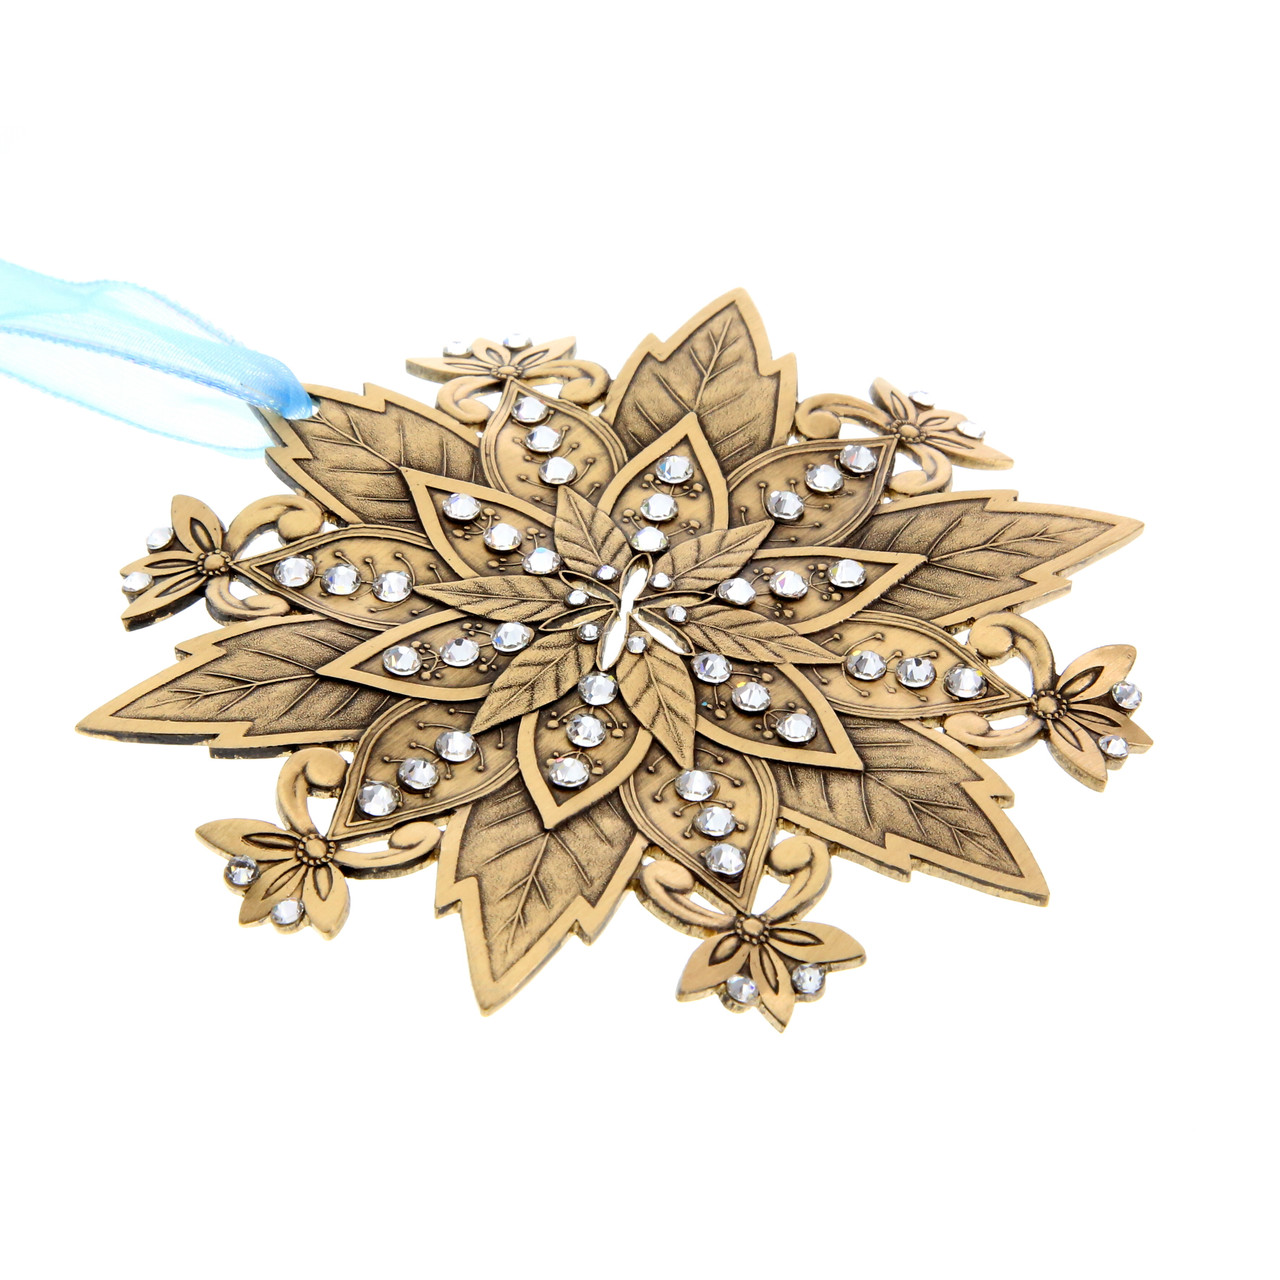 Snow Crystal Poinsettia Ornament (Bronze) - Wendell August Forge